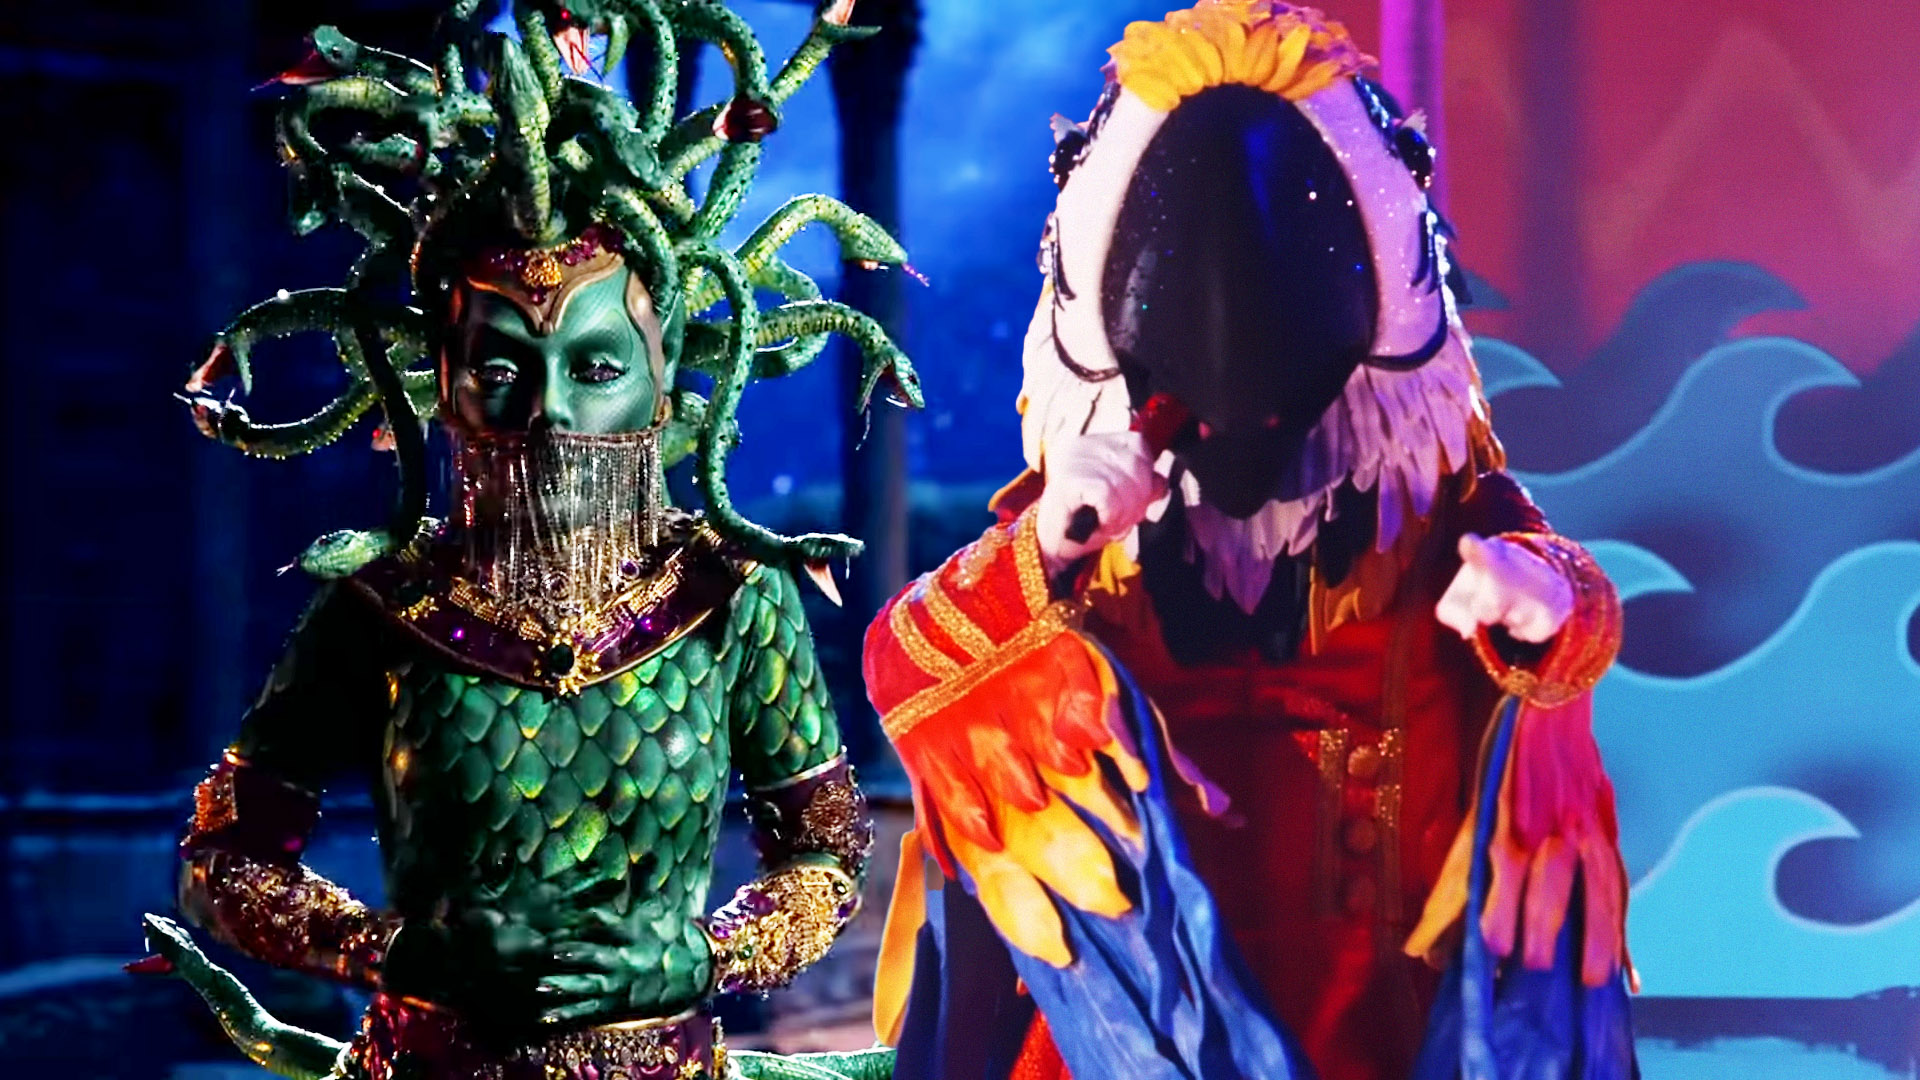 Final Prediction: Will Macaw OR Medusa Win Masked Singer Season 9?